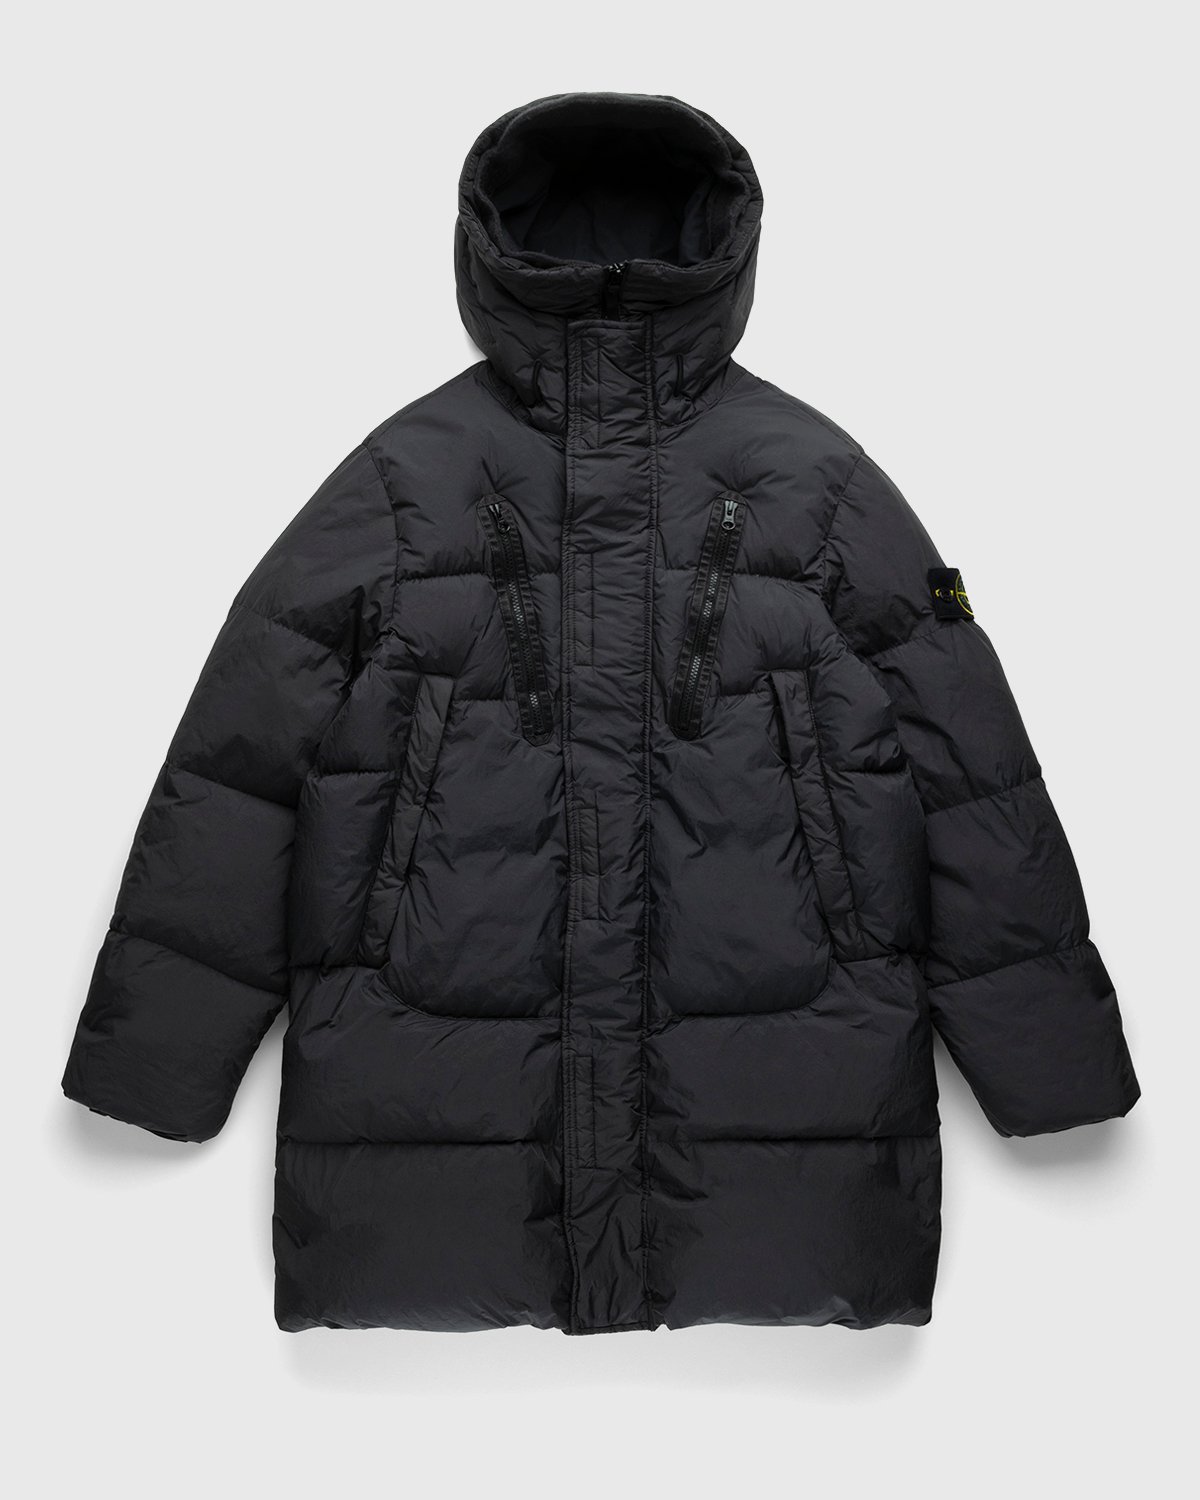 Stone Island - Garment Dyed Real Down Blouson Charcoal - Clothing - Black - Image 1